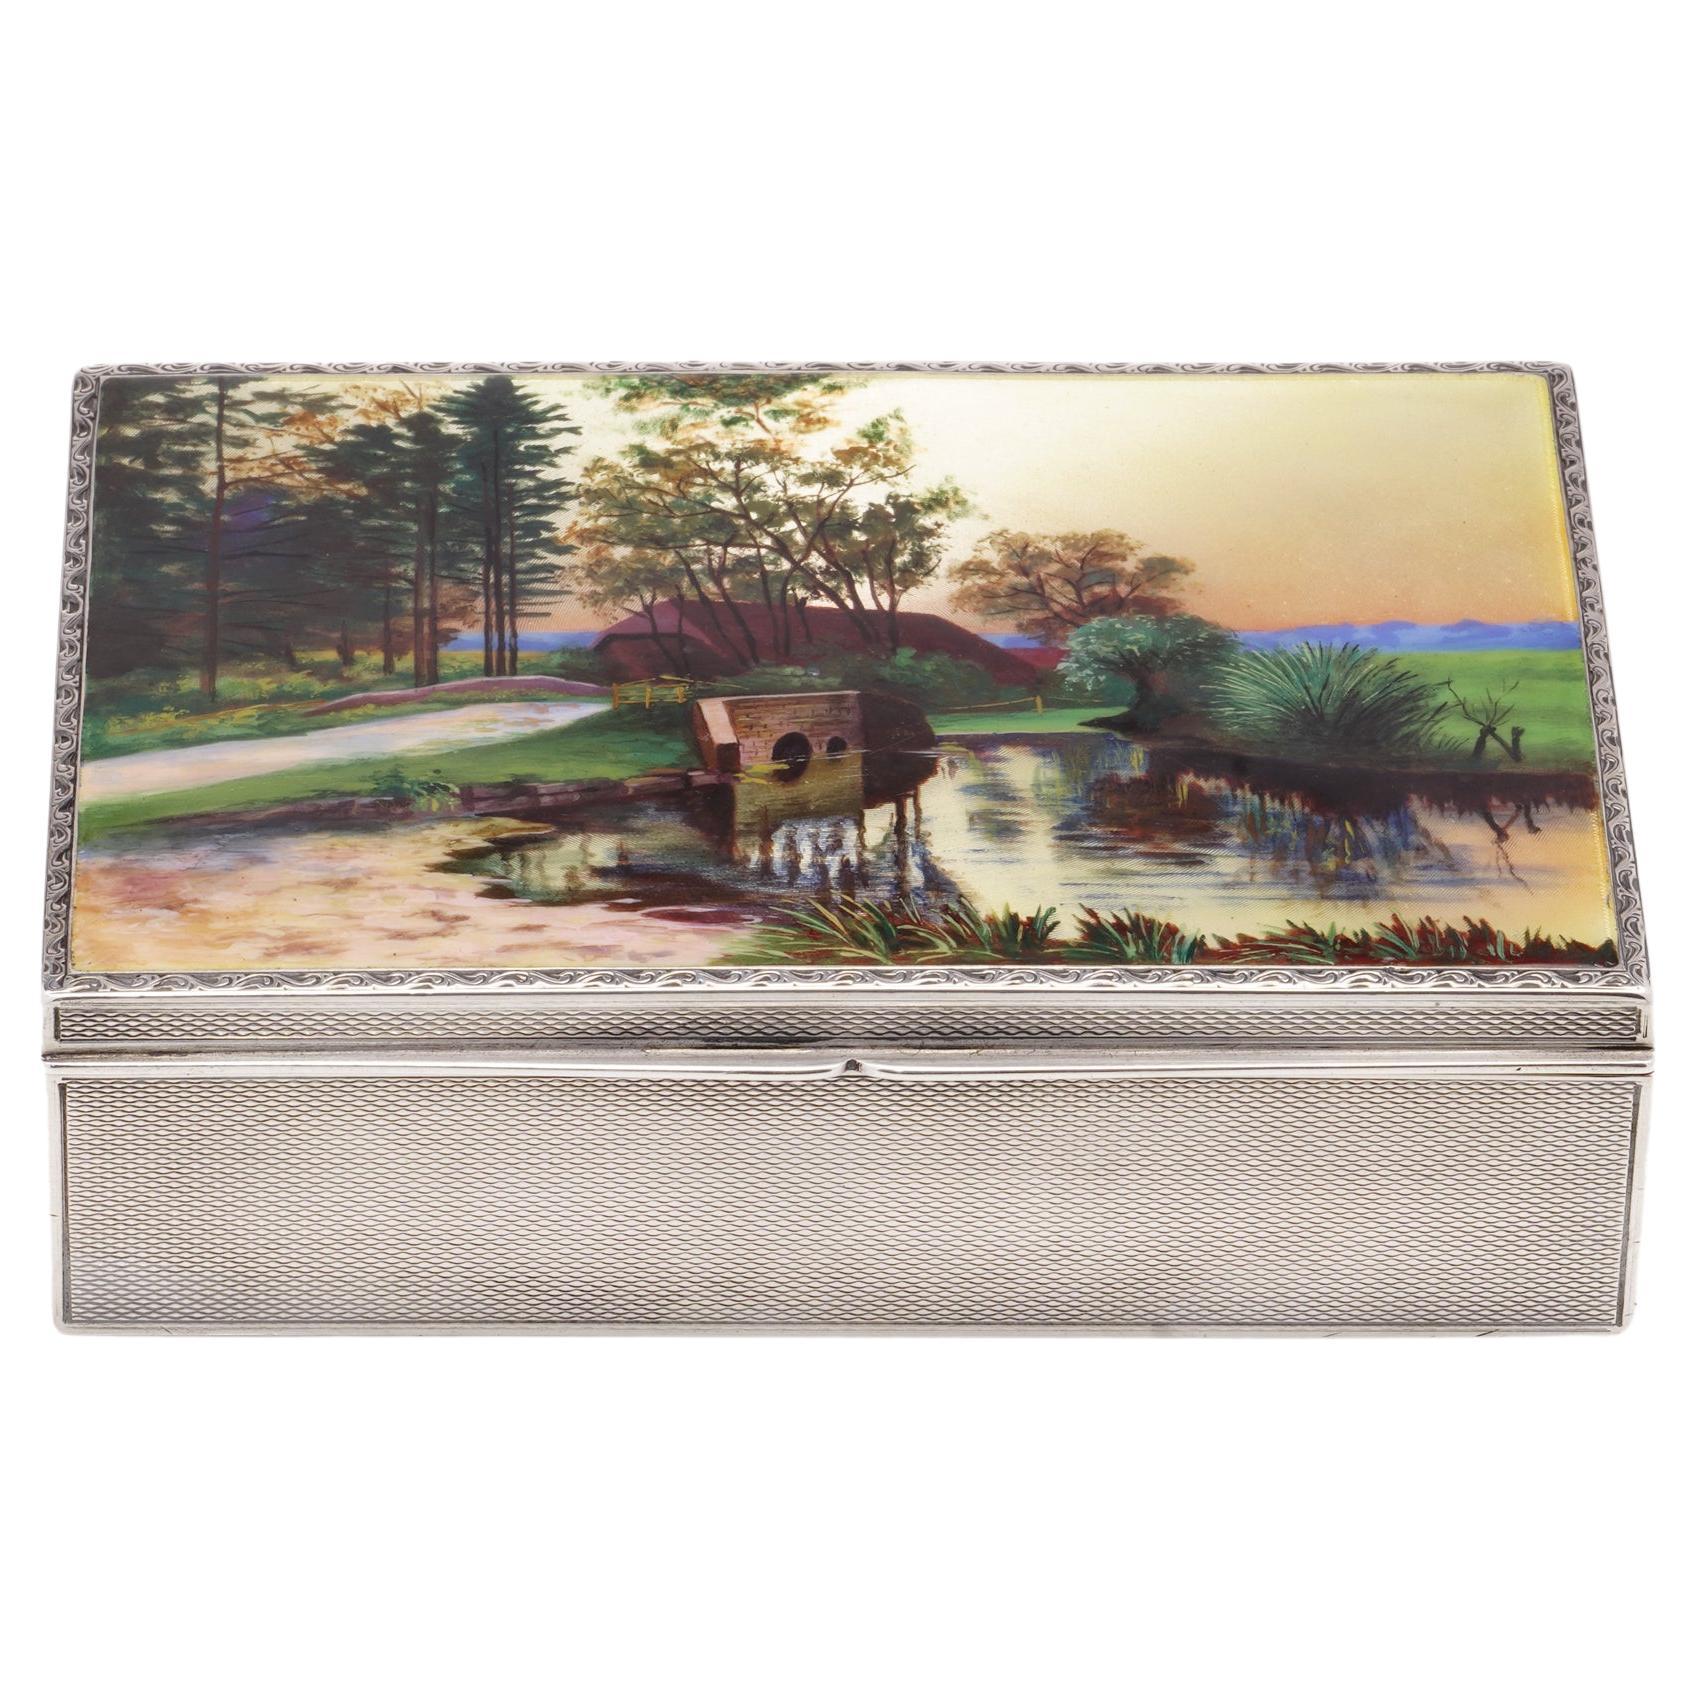 Antique early 20th Century sterling silver cigarette box with enamelled cover, featuring a landscape scenery.
The complete box showcases a traditional engine-turned design on each of its four sides as well as the base.

Made in America, Circa 1900's